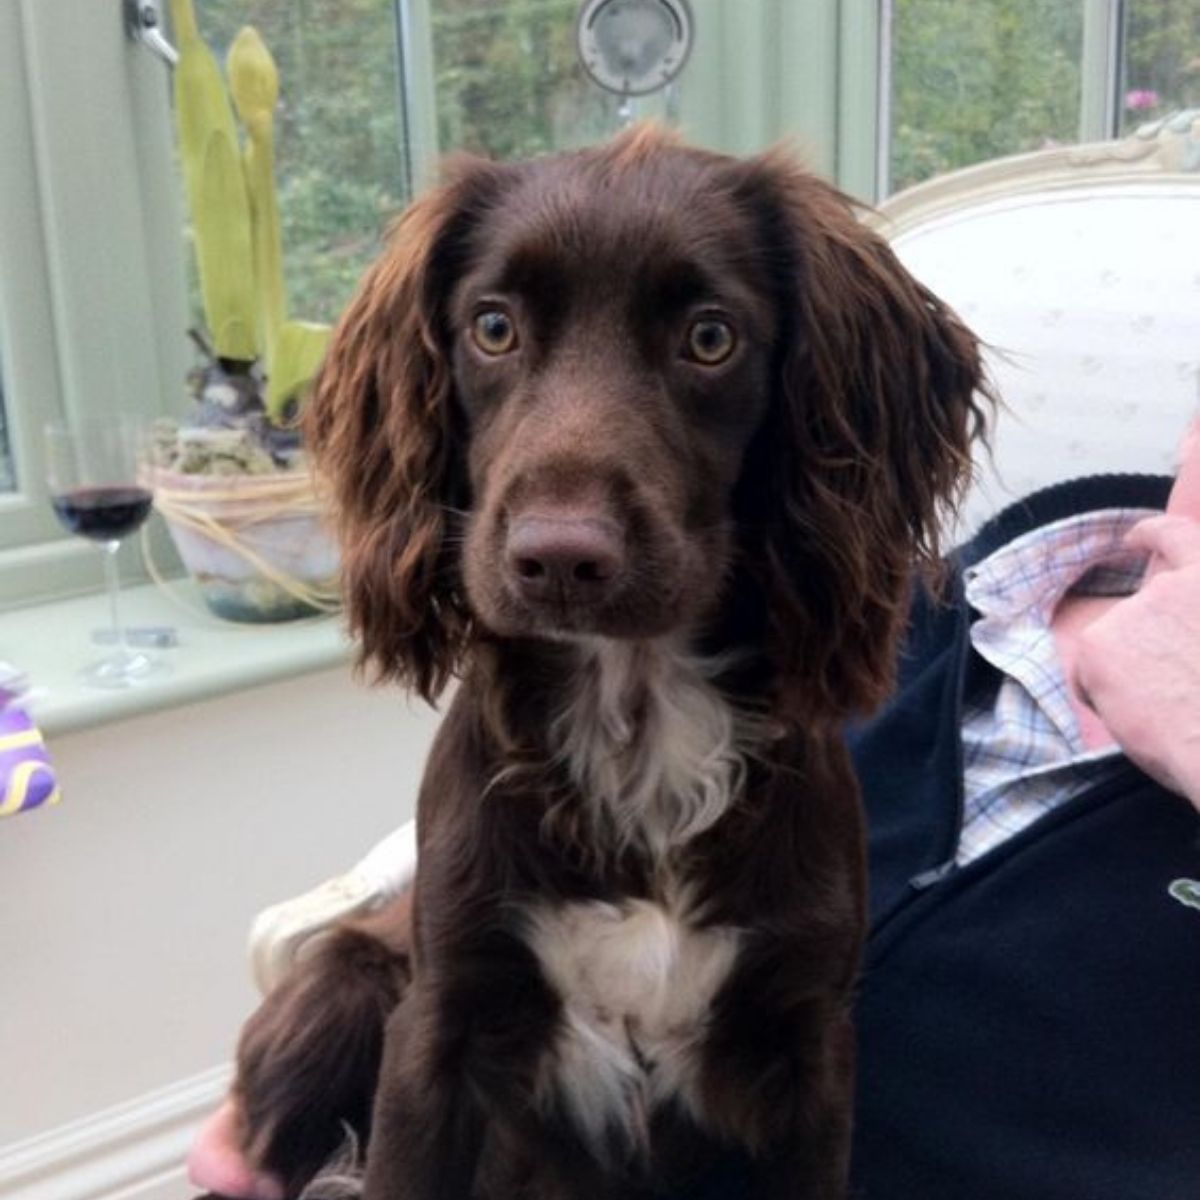 The 21 Cutest Pictures of Chocolate Cocker Spaniels - The Paws